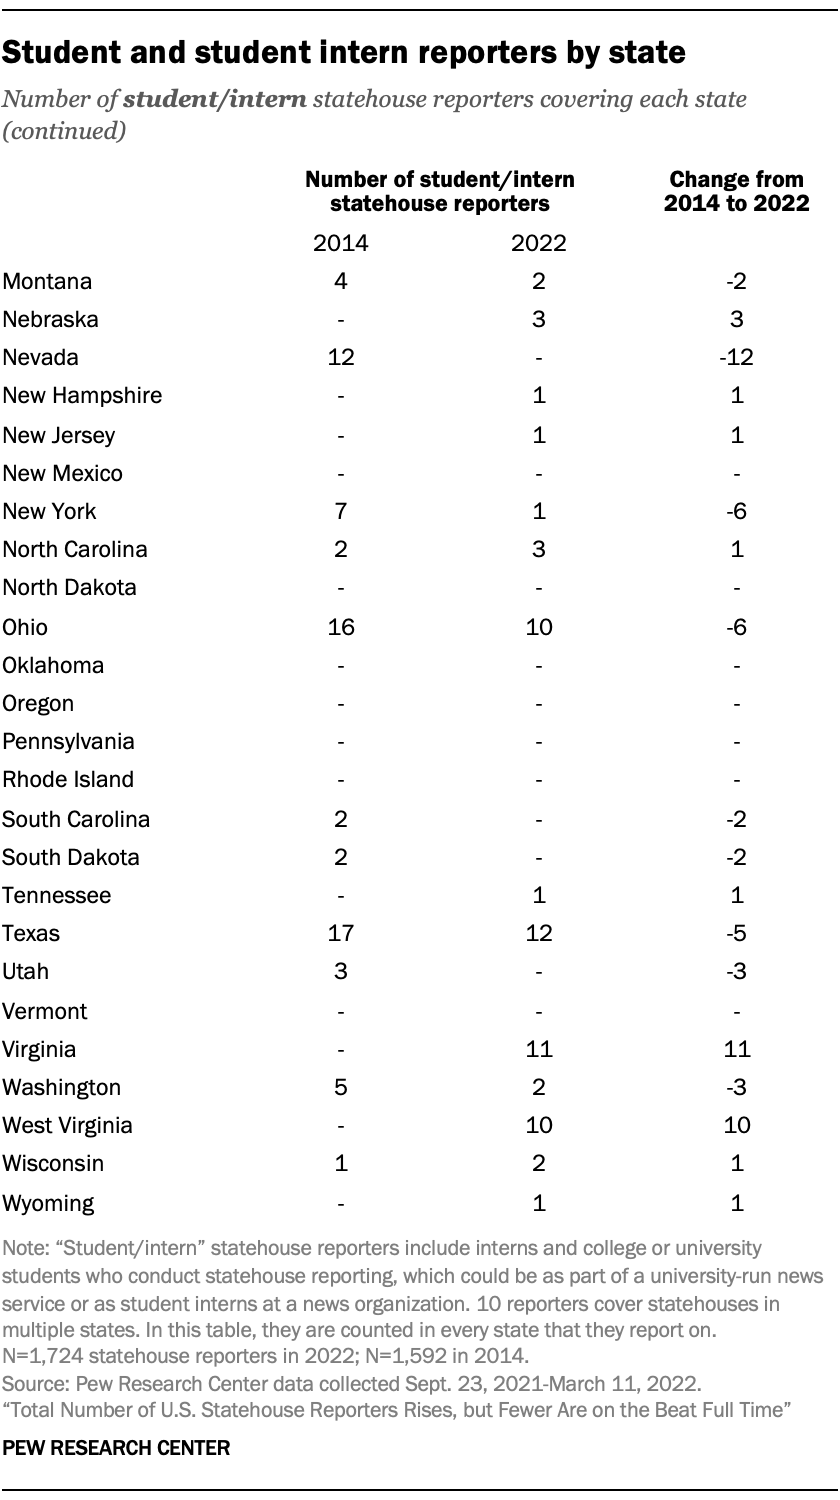 Student and student intern reporters by state (Montana-Wyoming)